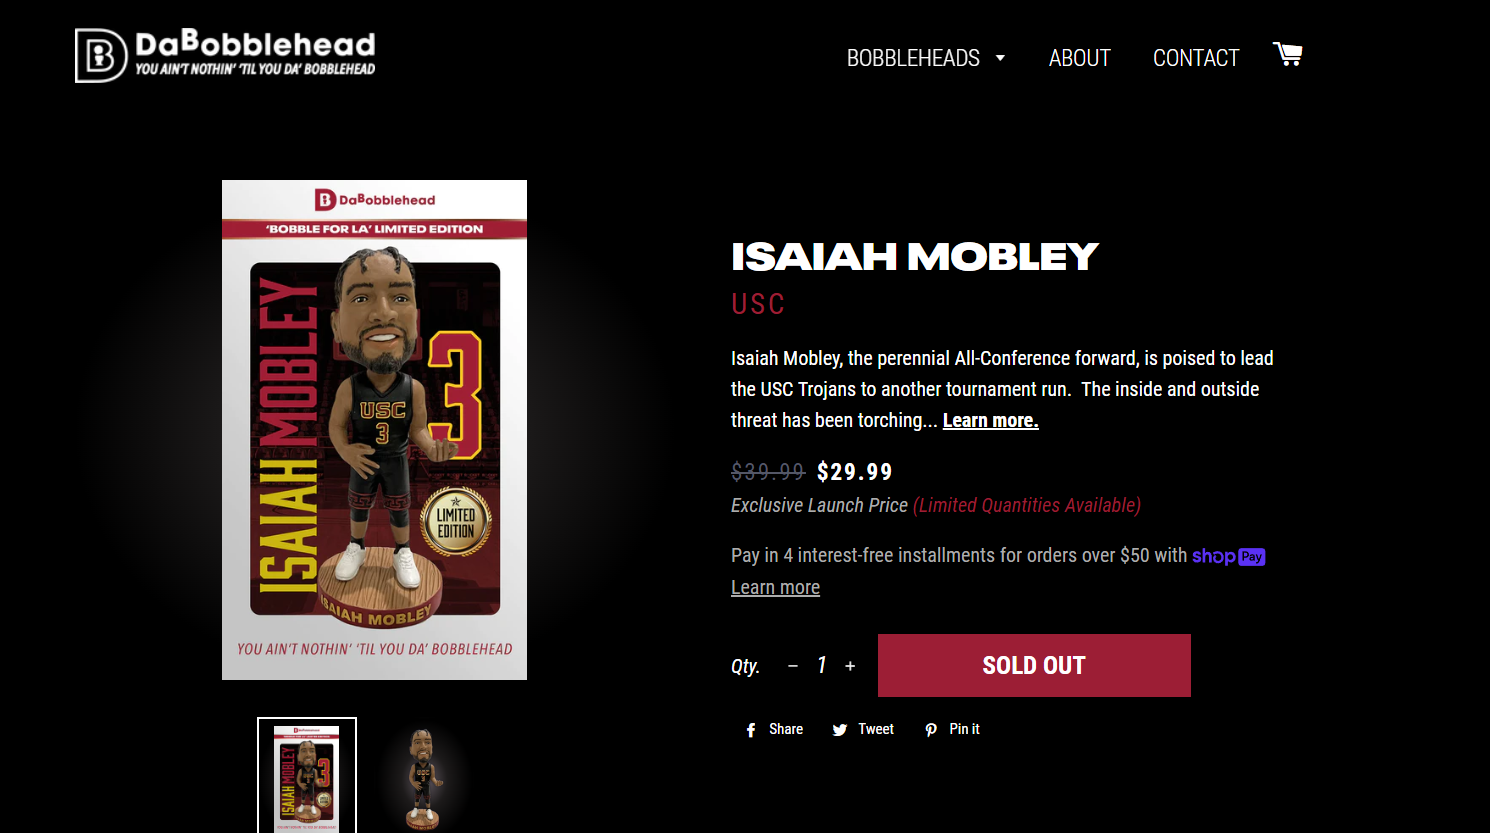 Limited Edition Bobblehead of Isaiah Mobley